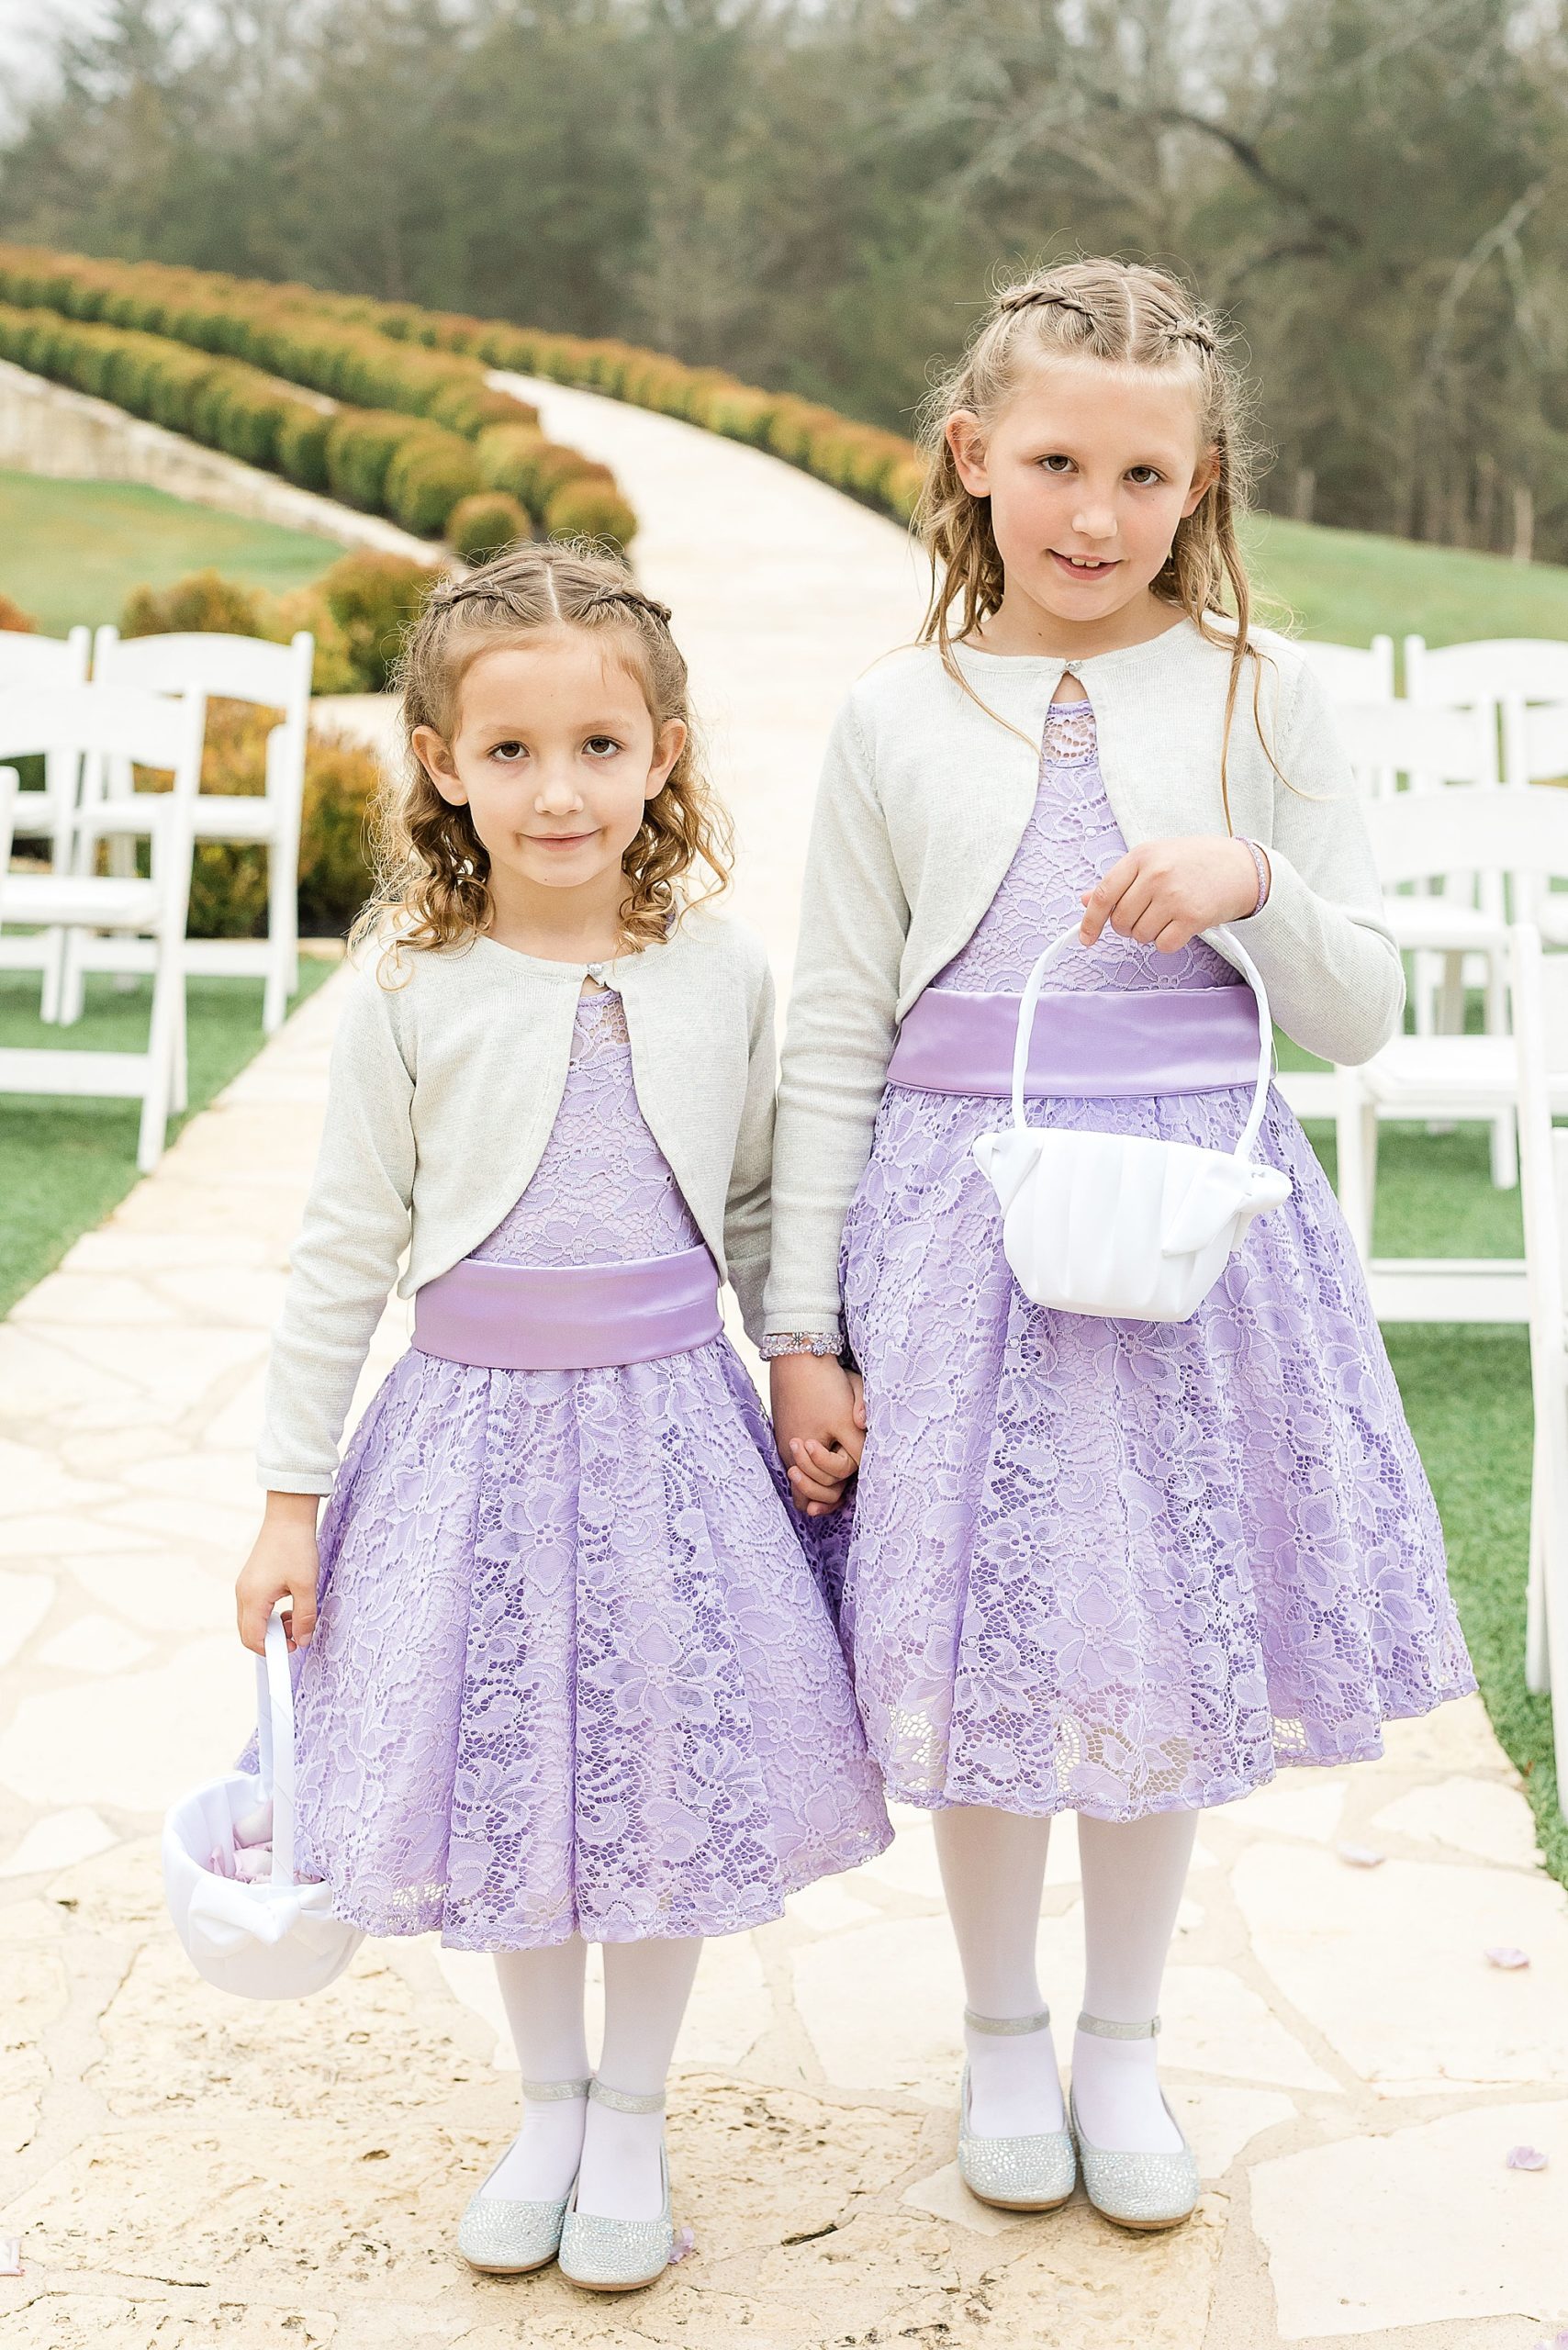 flower girls in purple dresses walk down aisle at outdoor wedding ceremony in Anna Texas